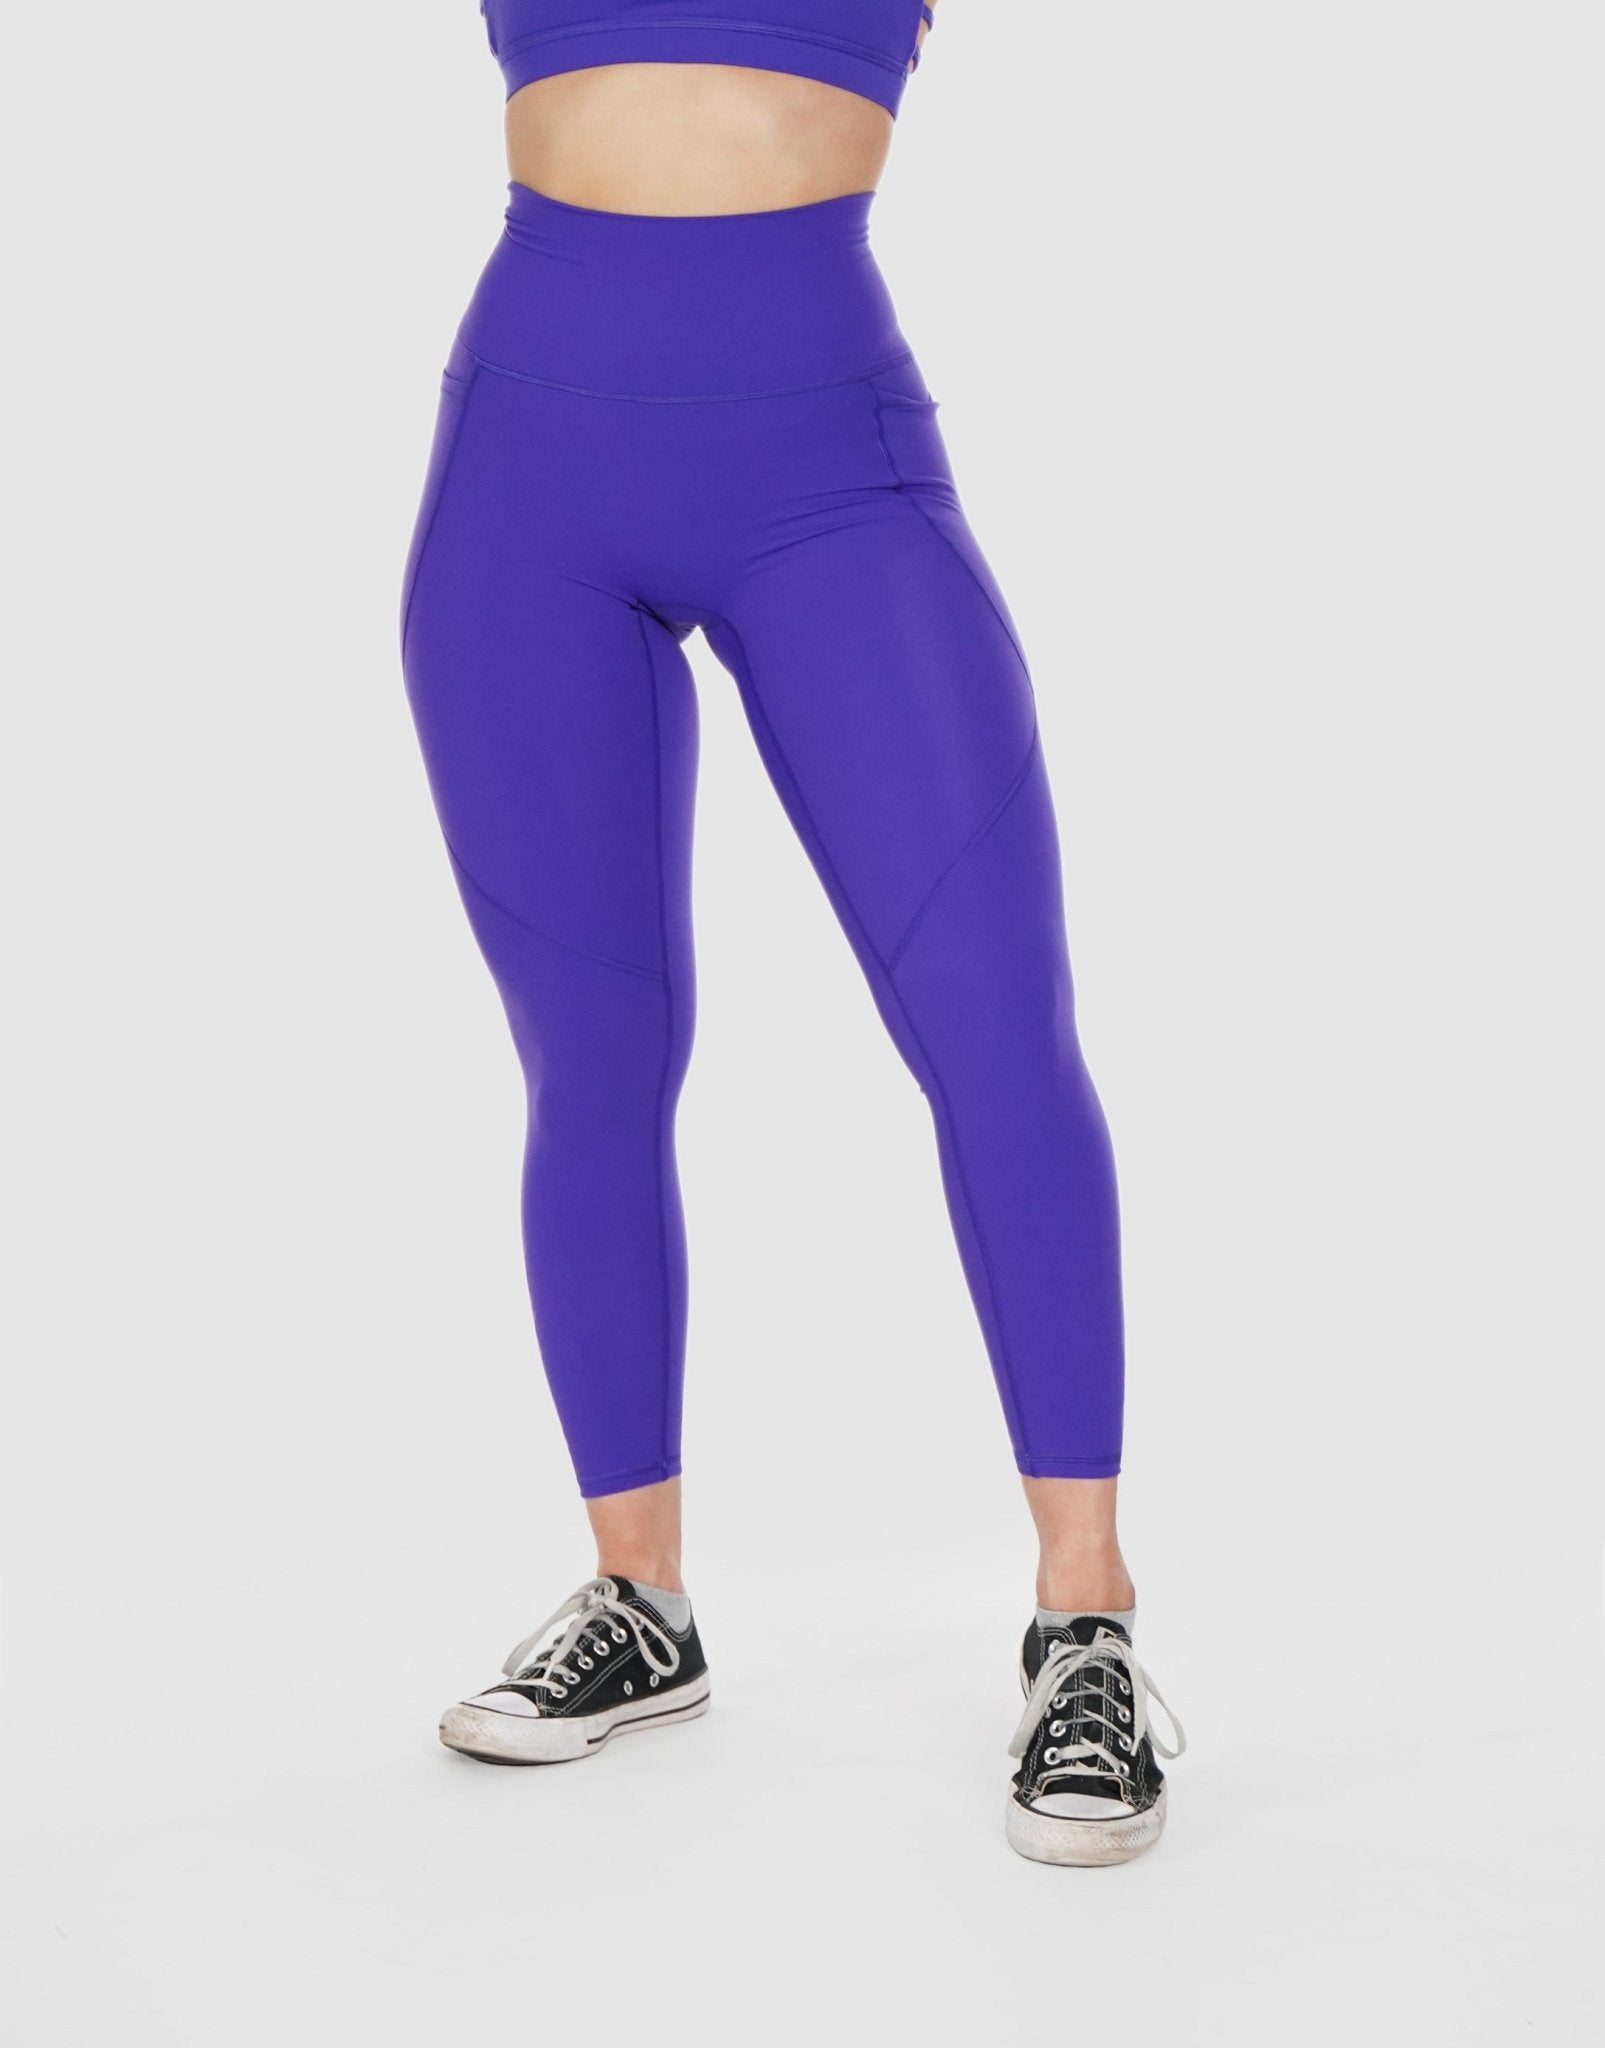 Glow Pocket Legging: Style Meets Function